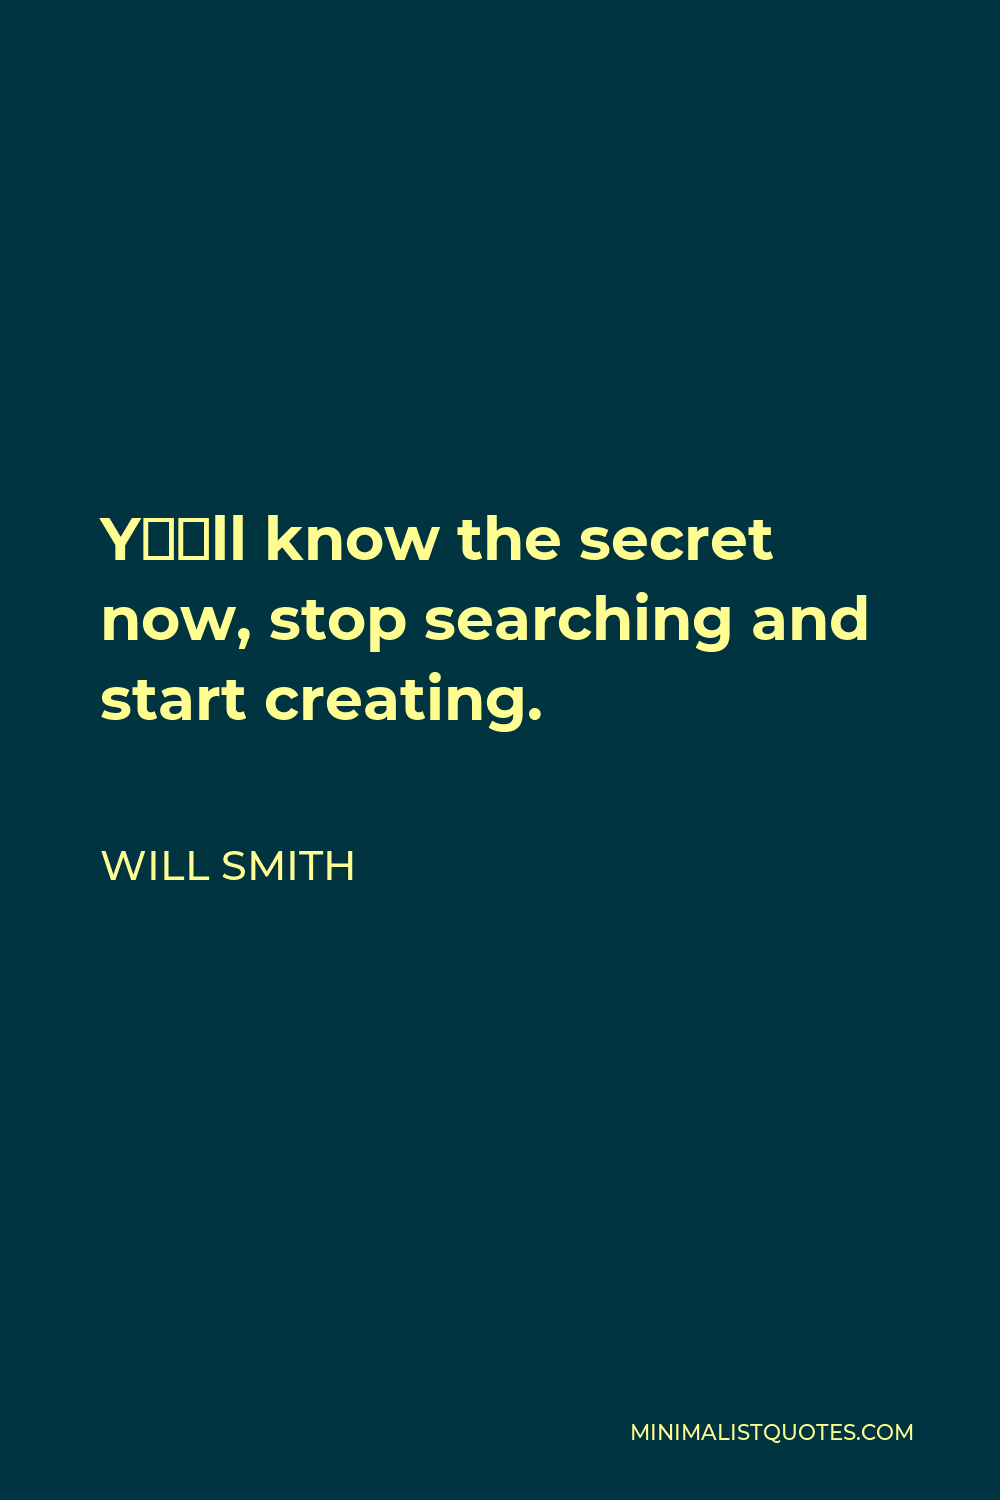 Will Smith Quote - Y’all know the secret now, stop searching and start creating.